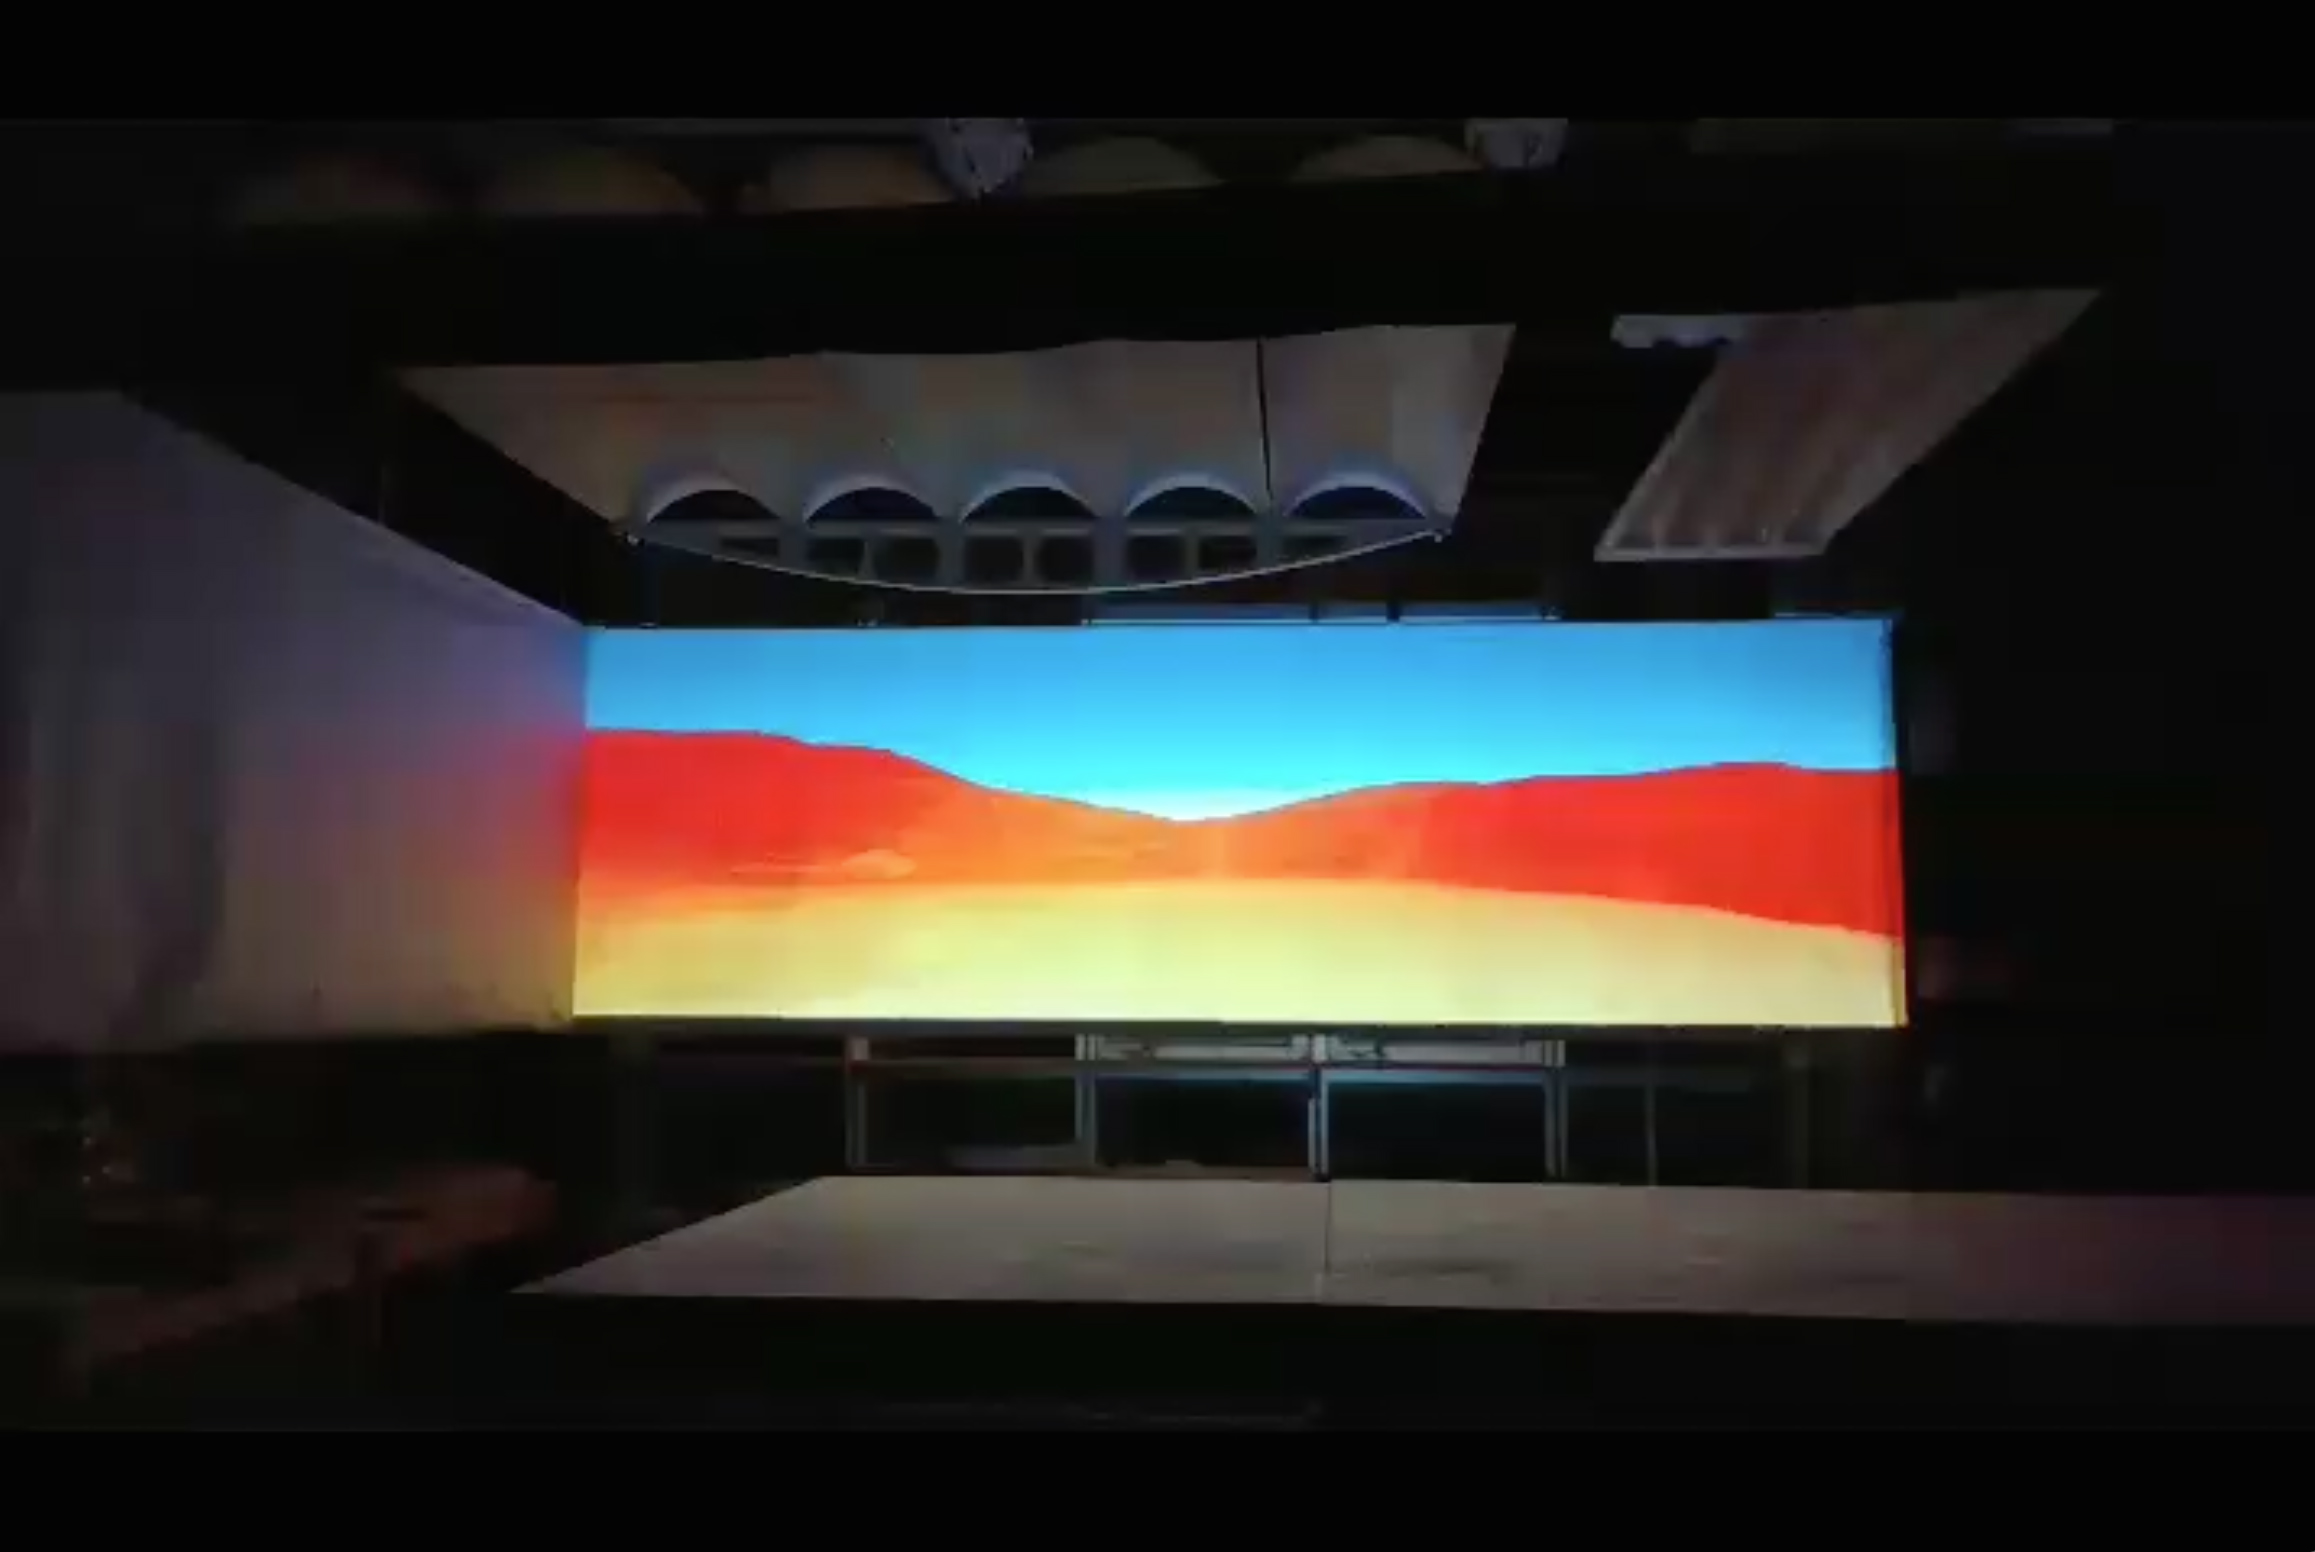 "16 Trajectories" video installation in C.A.S.T. by Lawrence Bird.